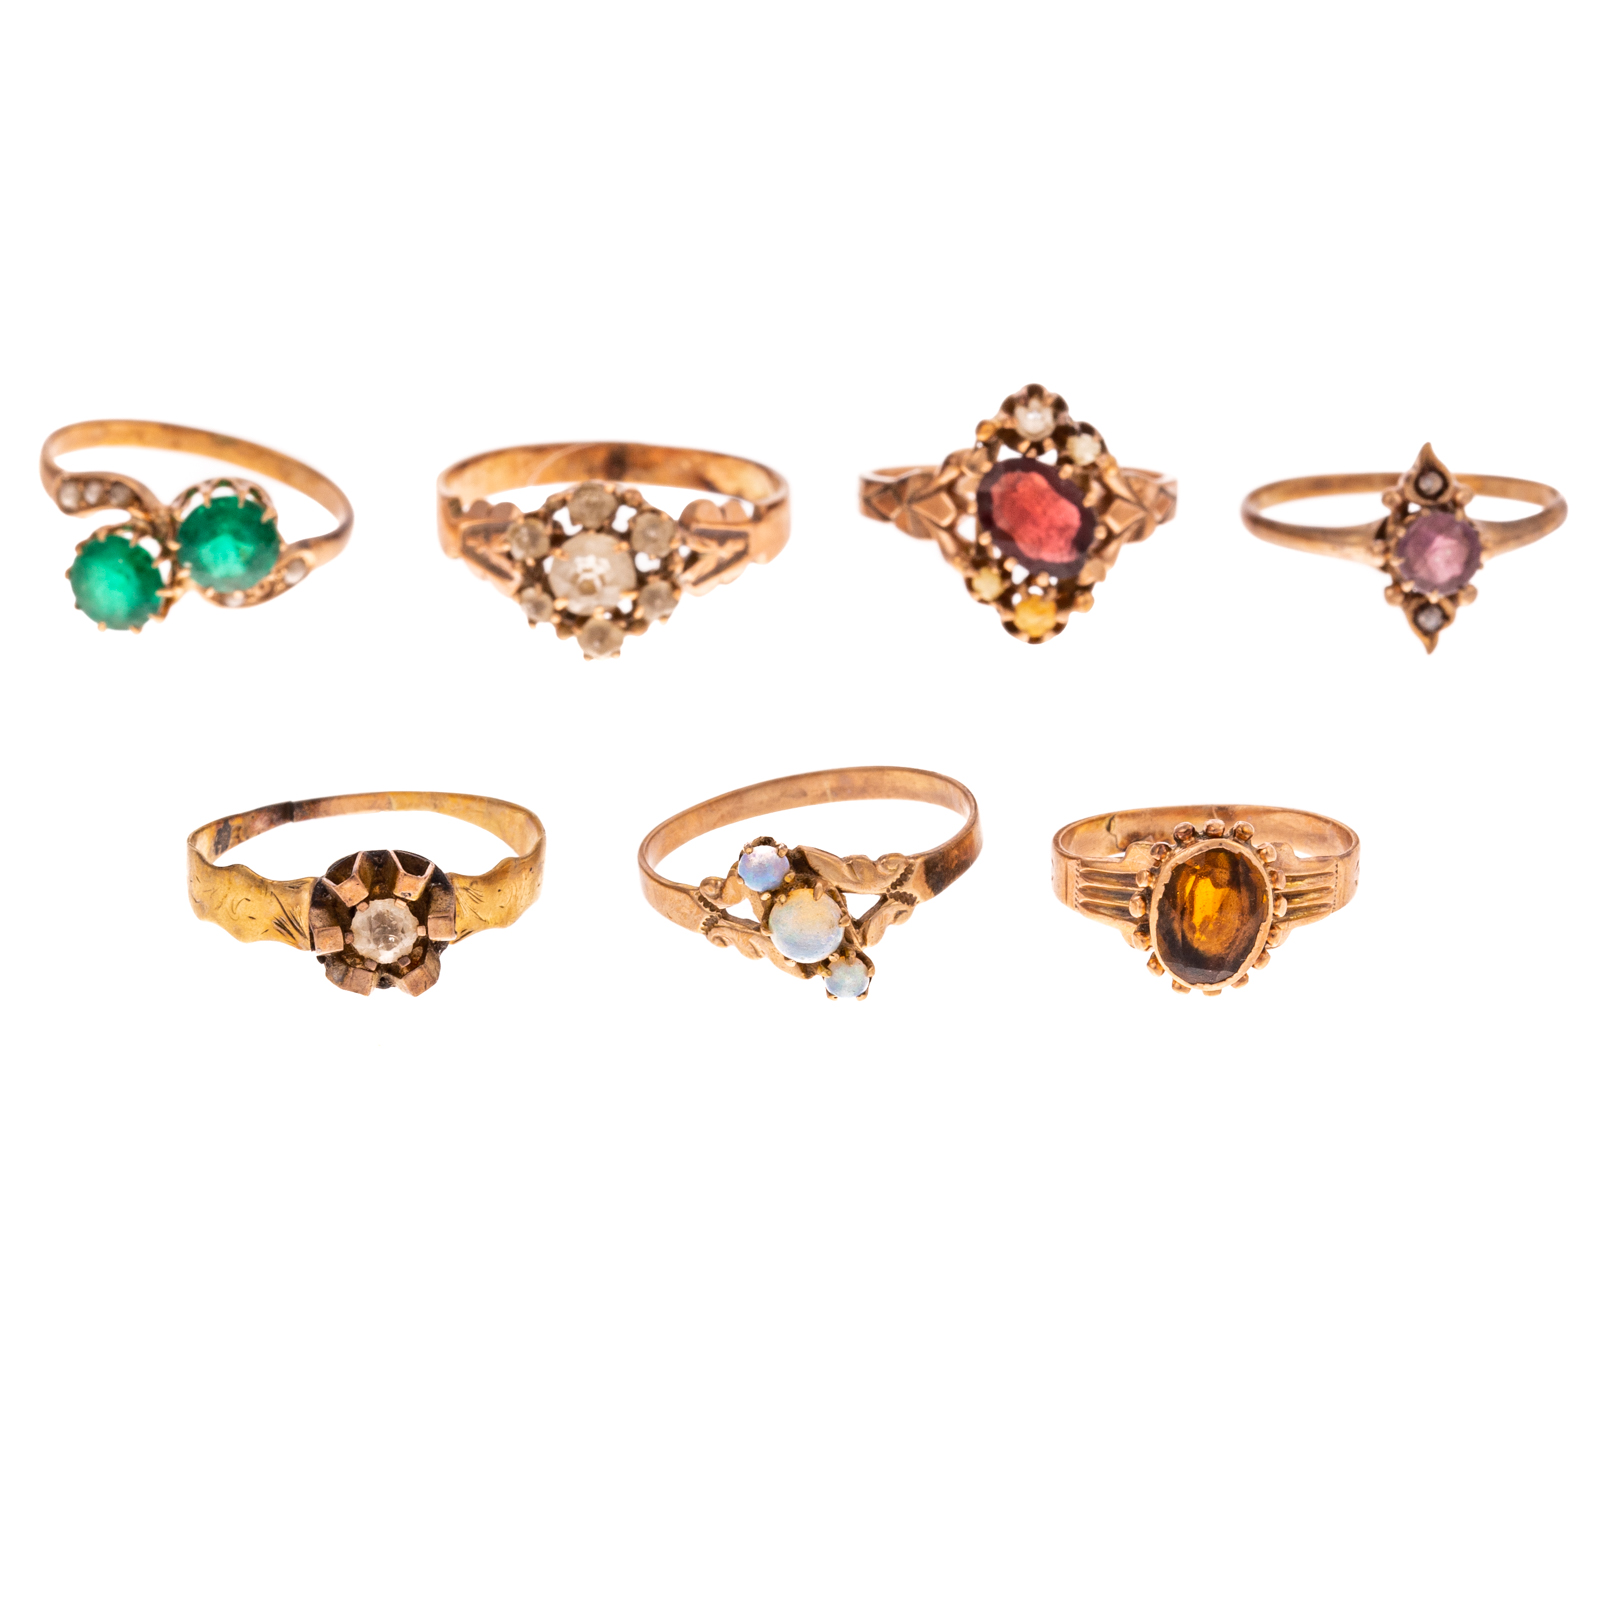 A COLLECTION OF SEVEN ANTIQUE RINGS